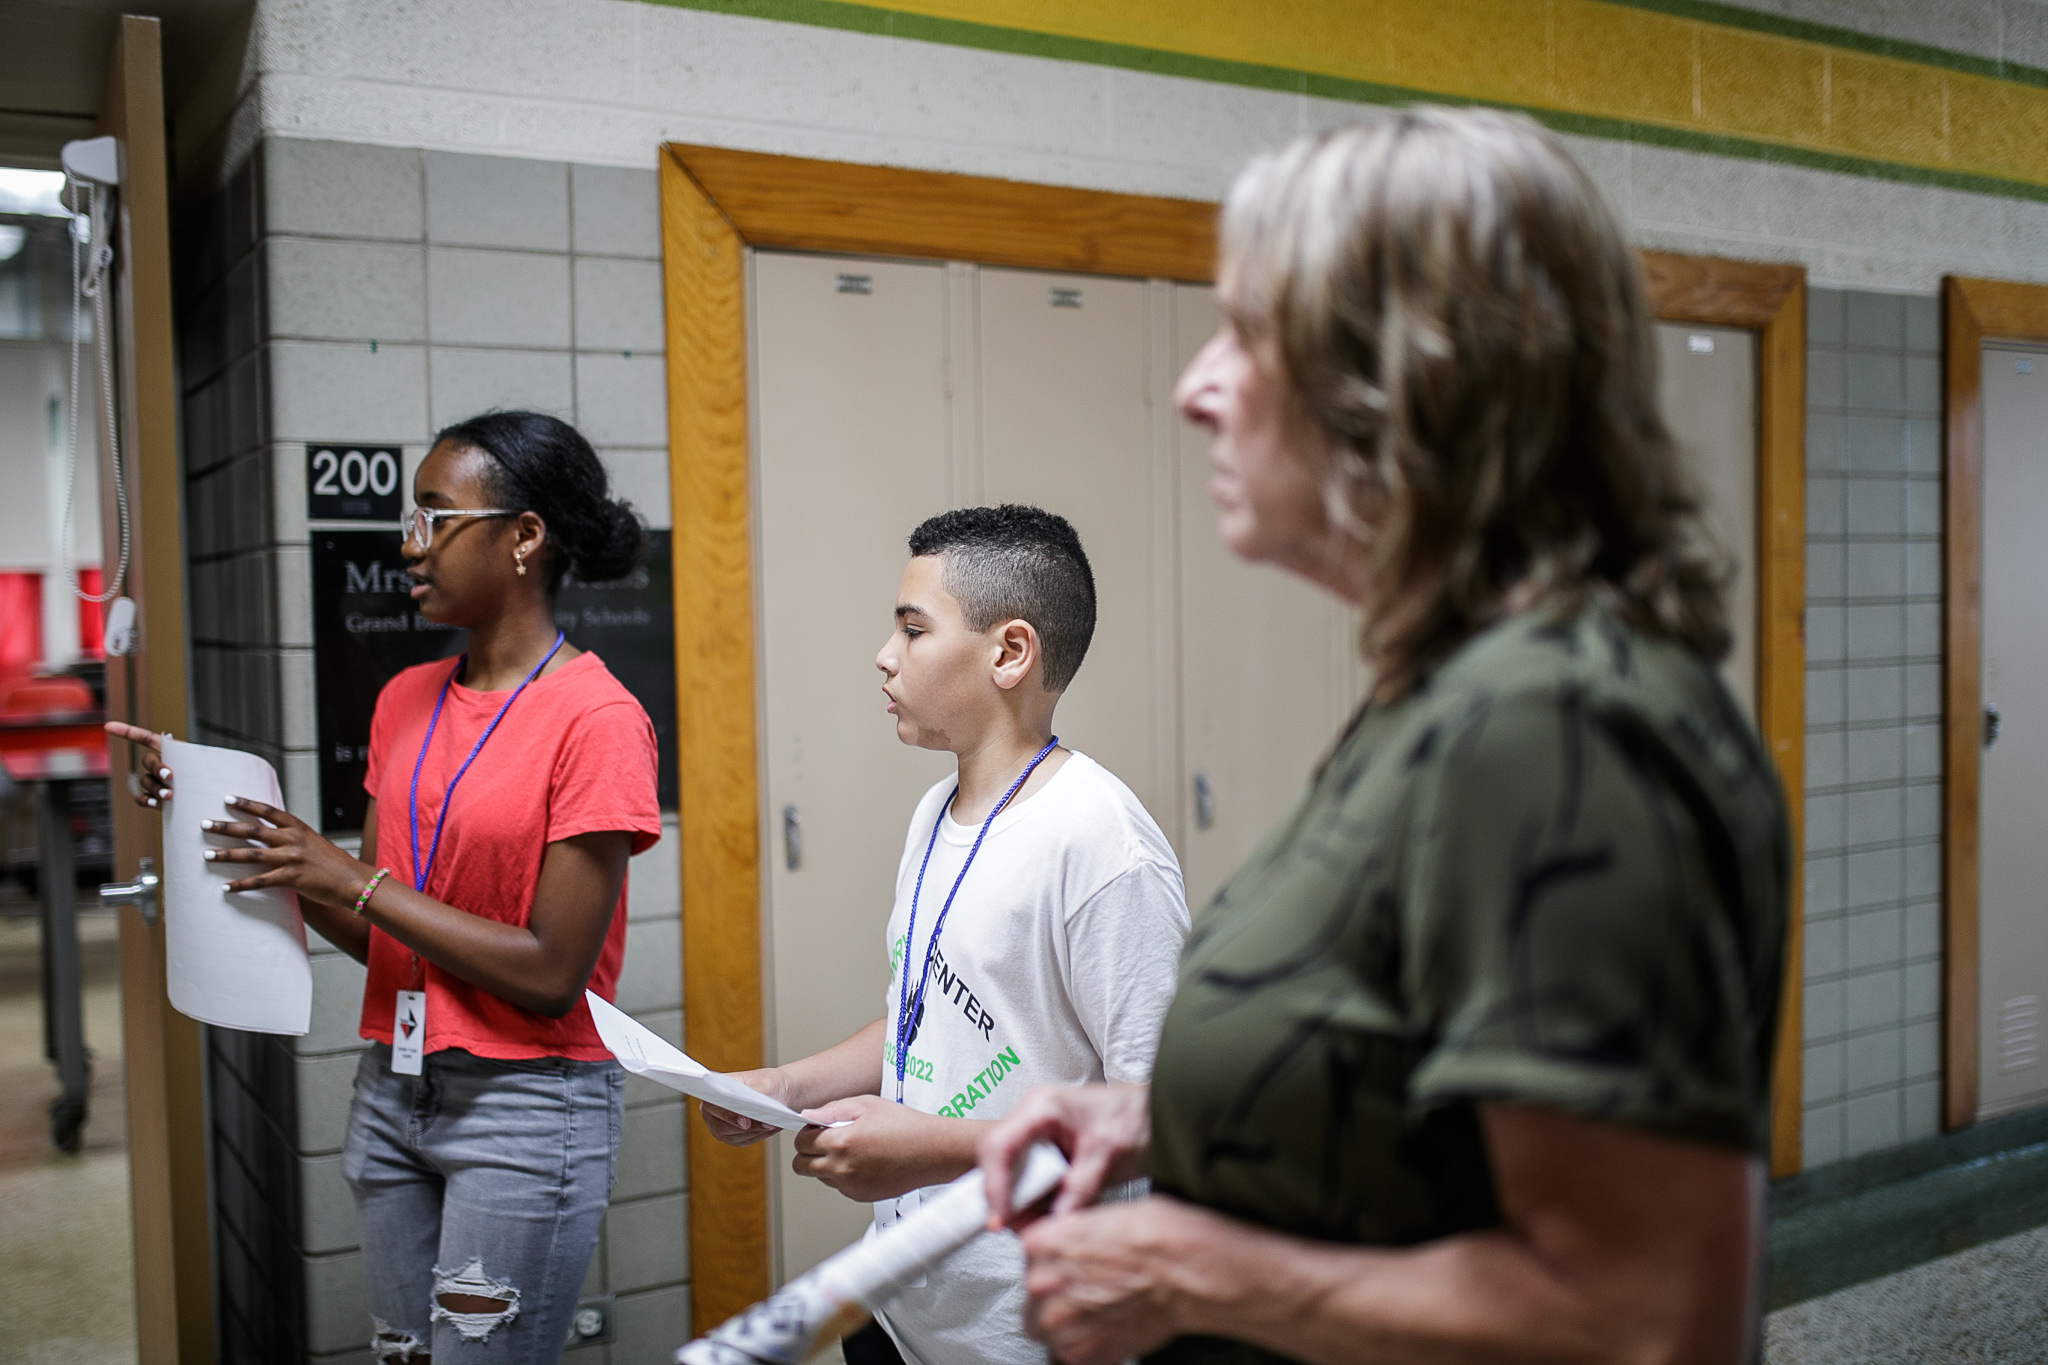 Students at Perry Center gave guided tours to the building during the Perry Center Centennial Event in Grand Blanc on Saturday, May 14, 2022. (Jenifer Veloso | MLive.com)